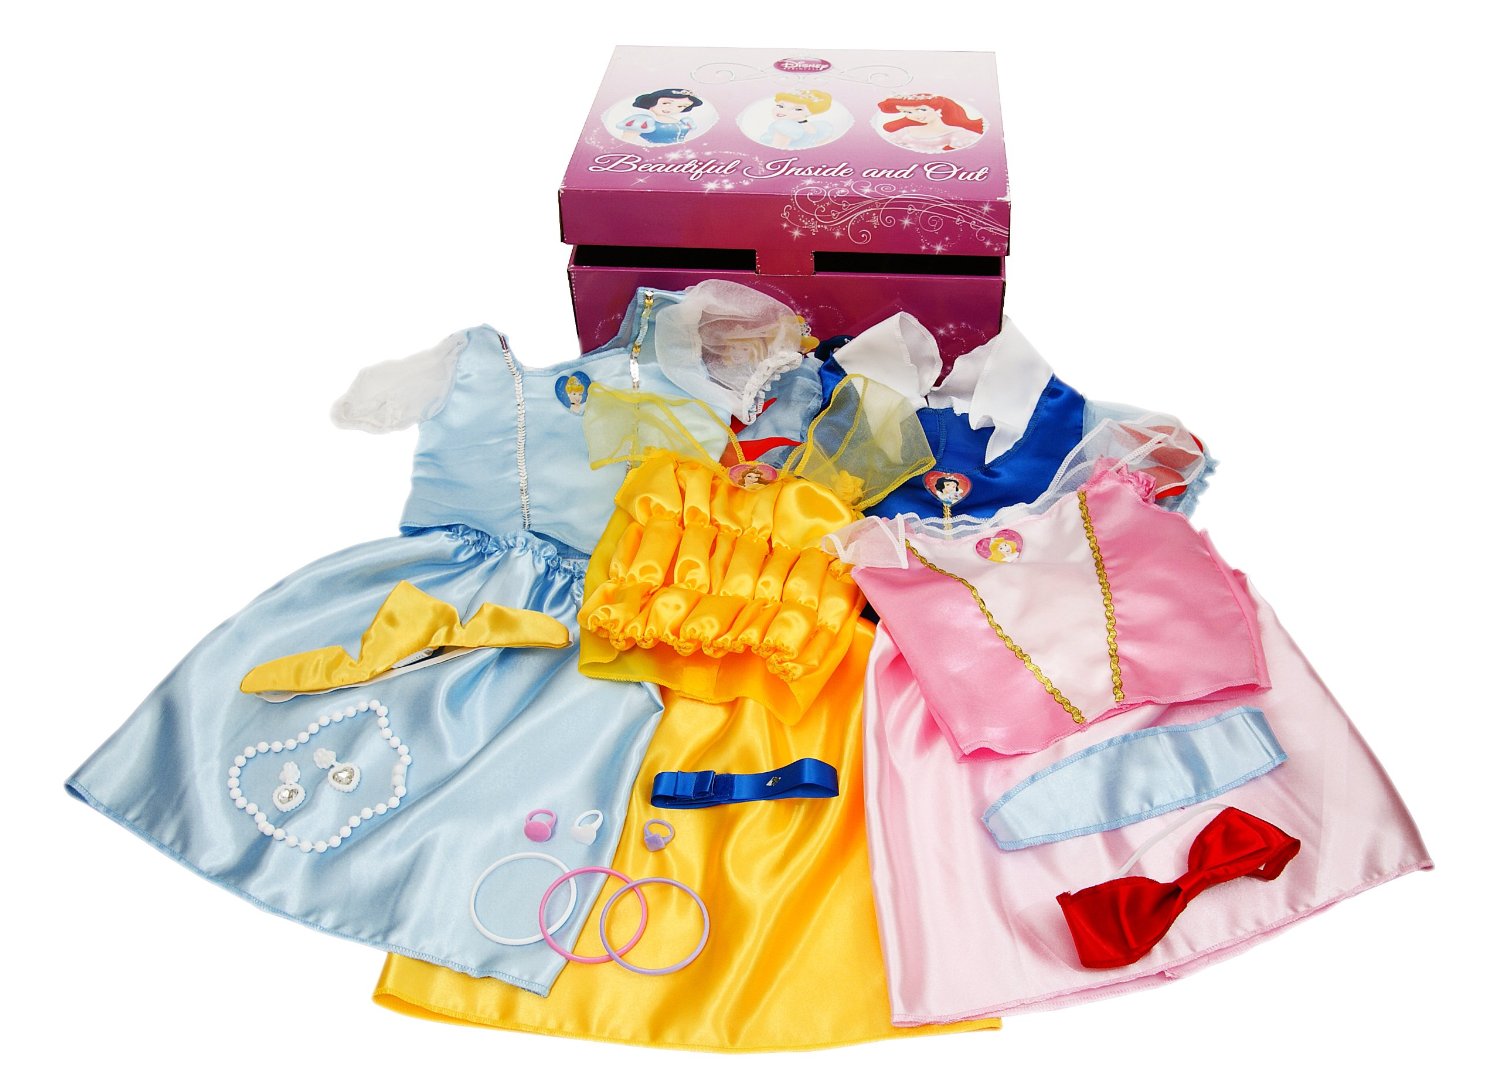 Have some fun with this Disney Princess Dress Up Kit